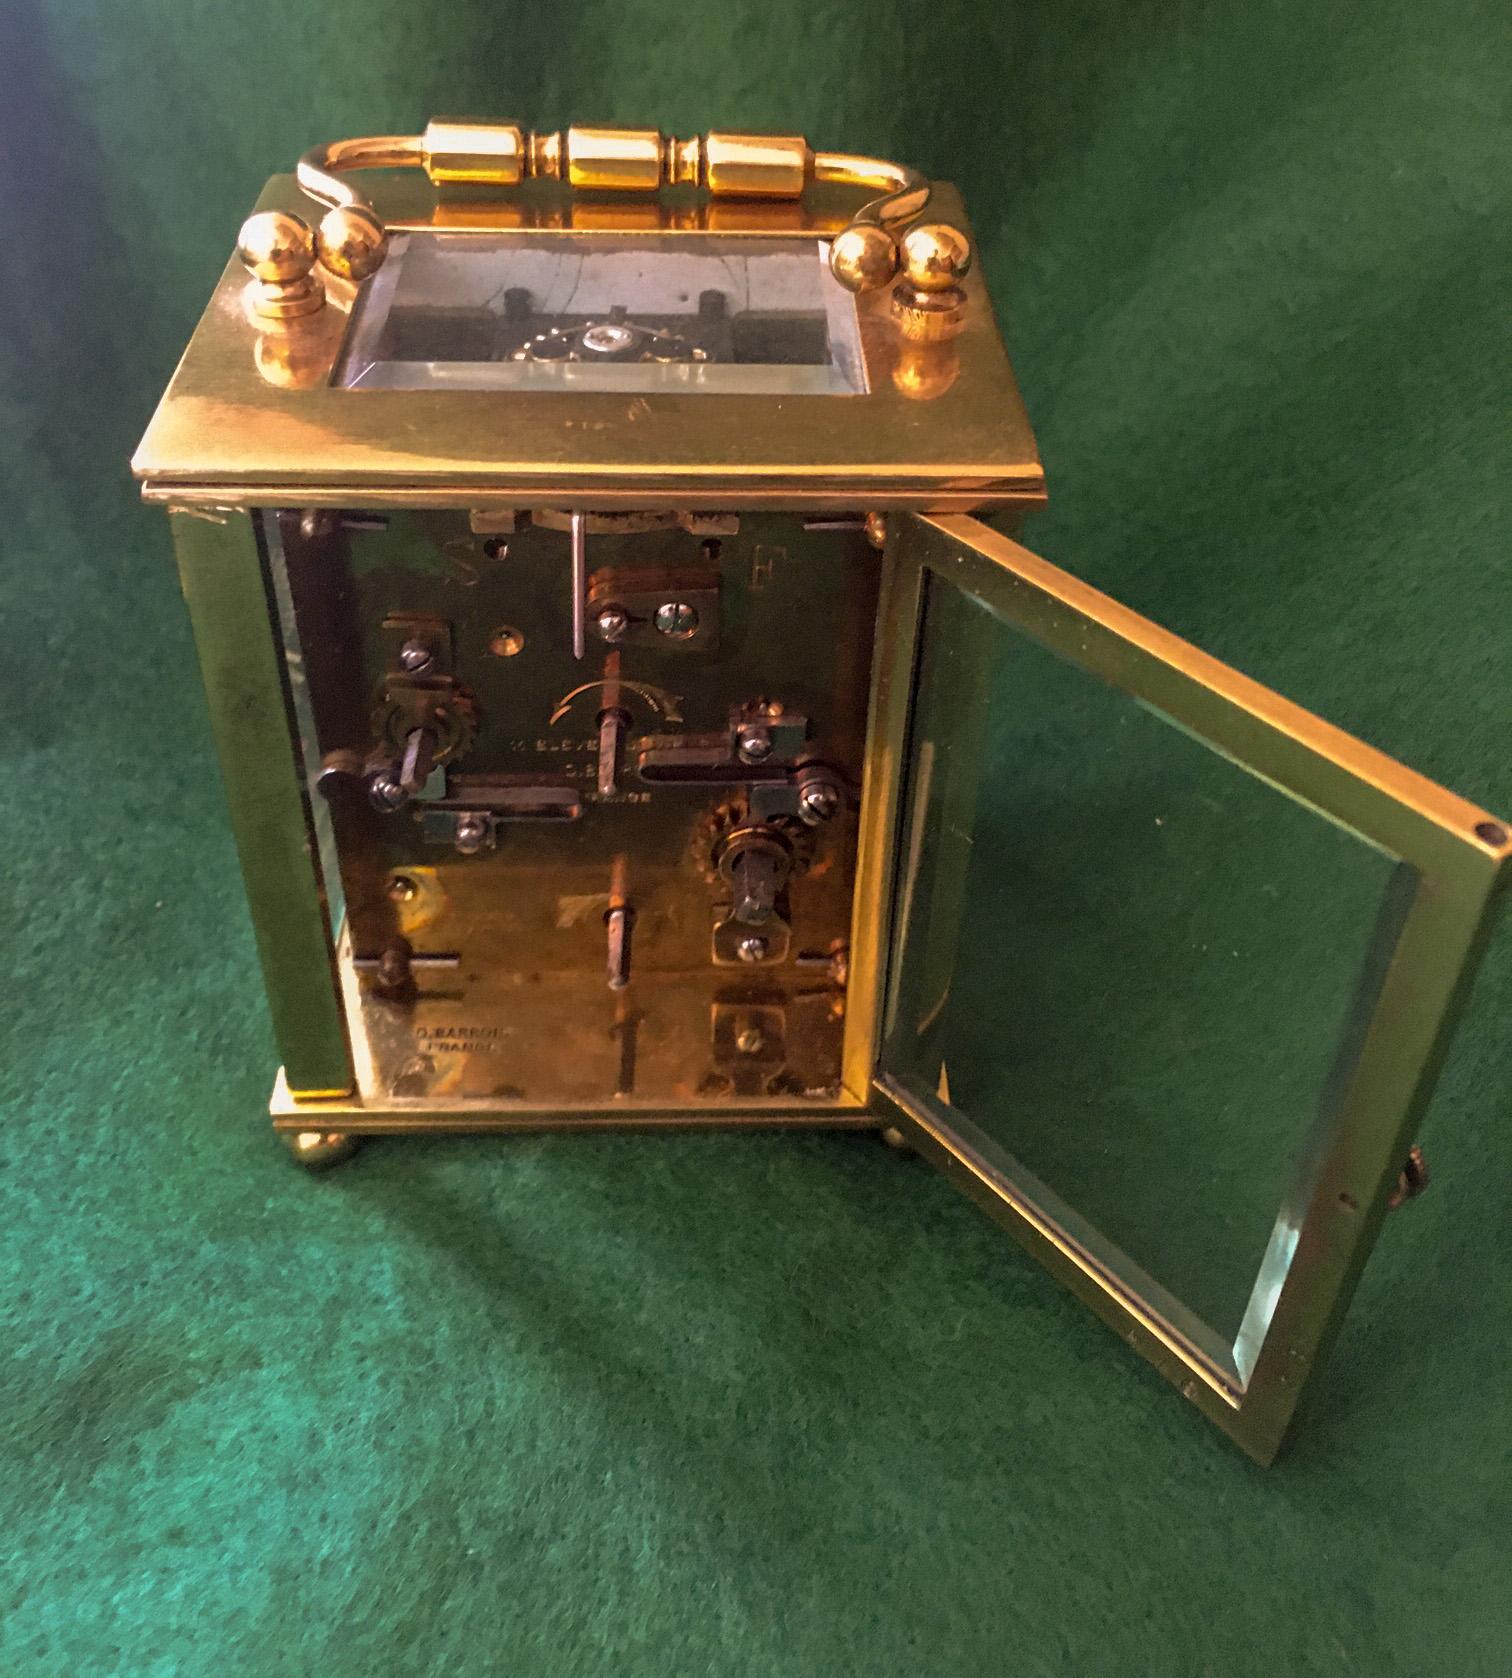 This classic French alarm carriage clock was made by Delépine-Barrois and features a  brass Cubique shaped case with rectangular
top with folding handle over a beveled glass escapement
aperture with four beveled glass sides held by plain
columns and